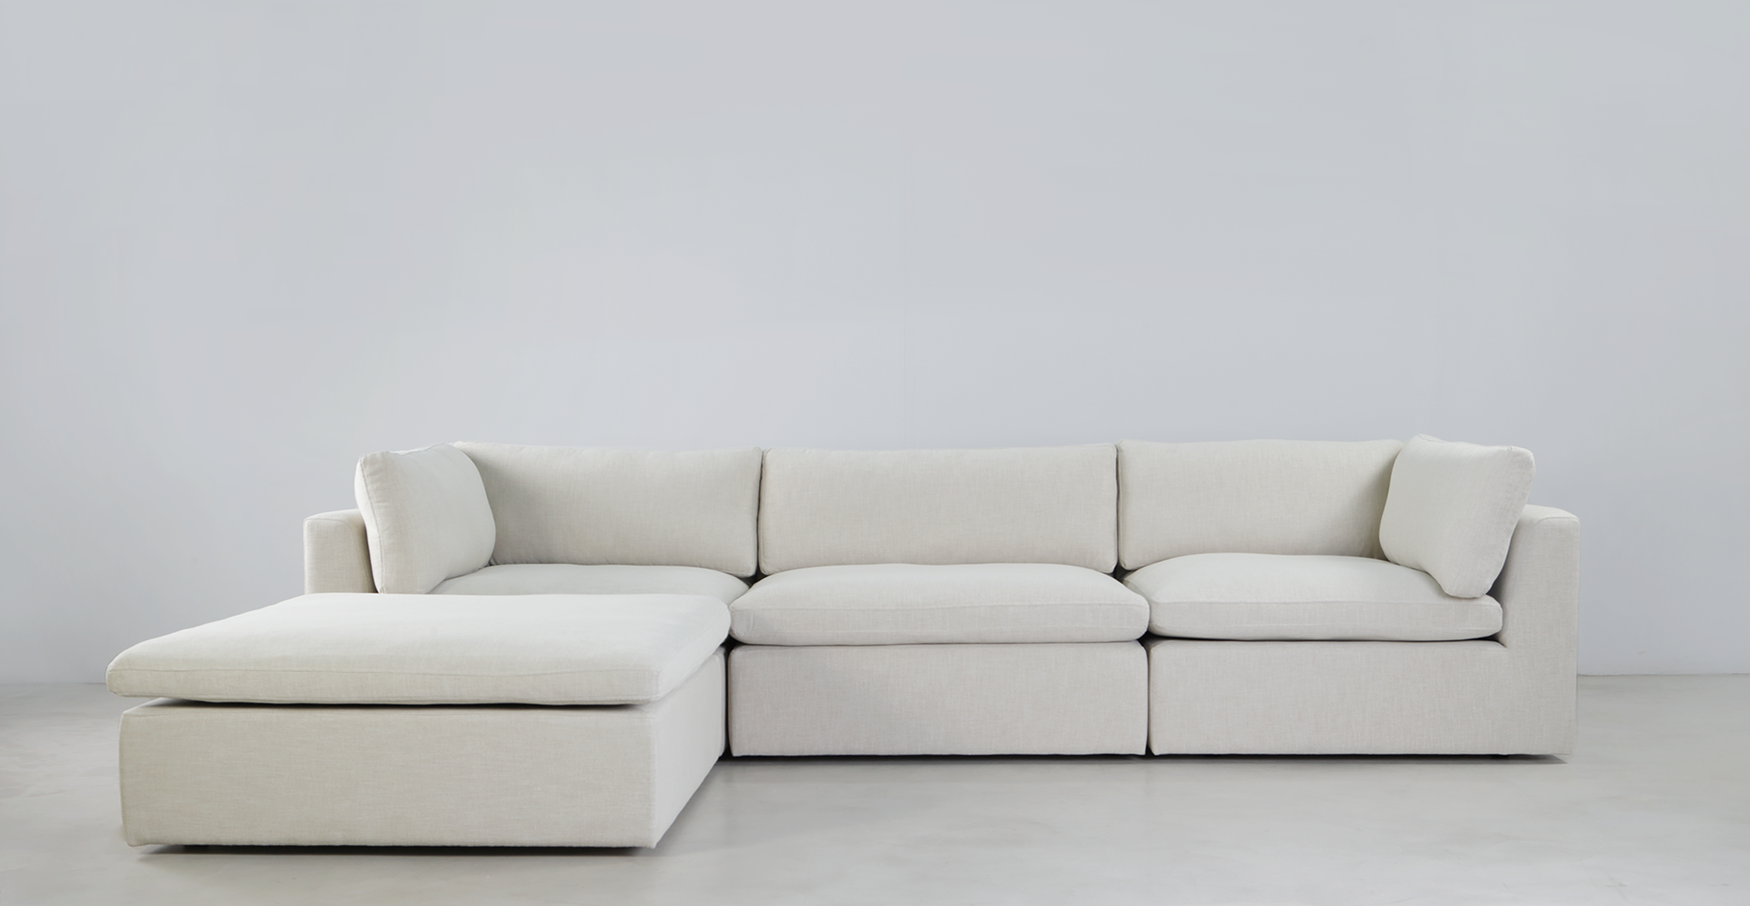 Couches For Sale unveils new modular seating range, whilst bolstering South African furniture manufacturing